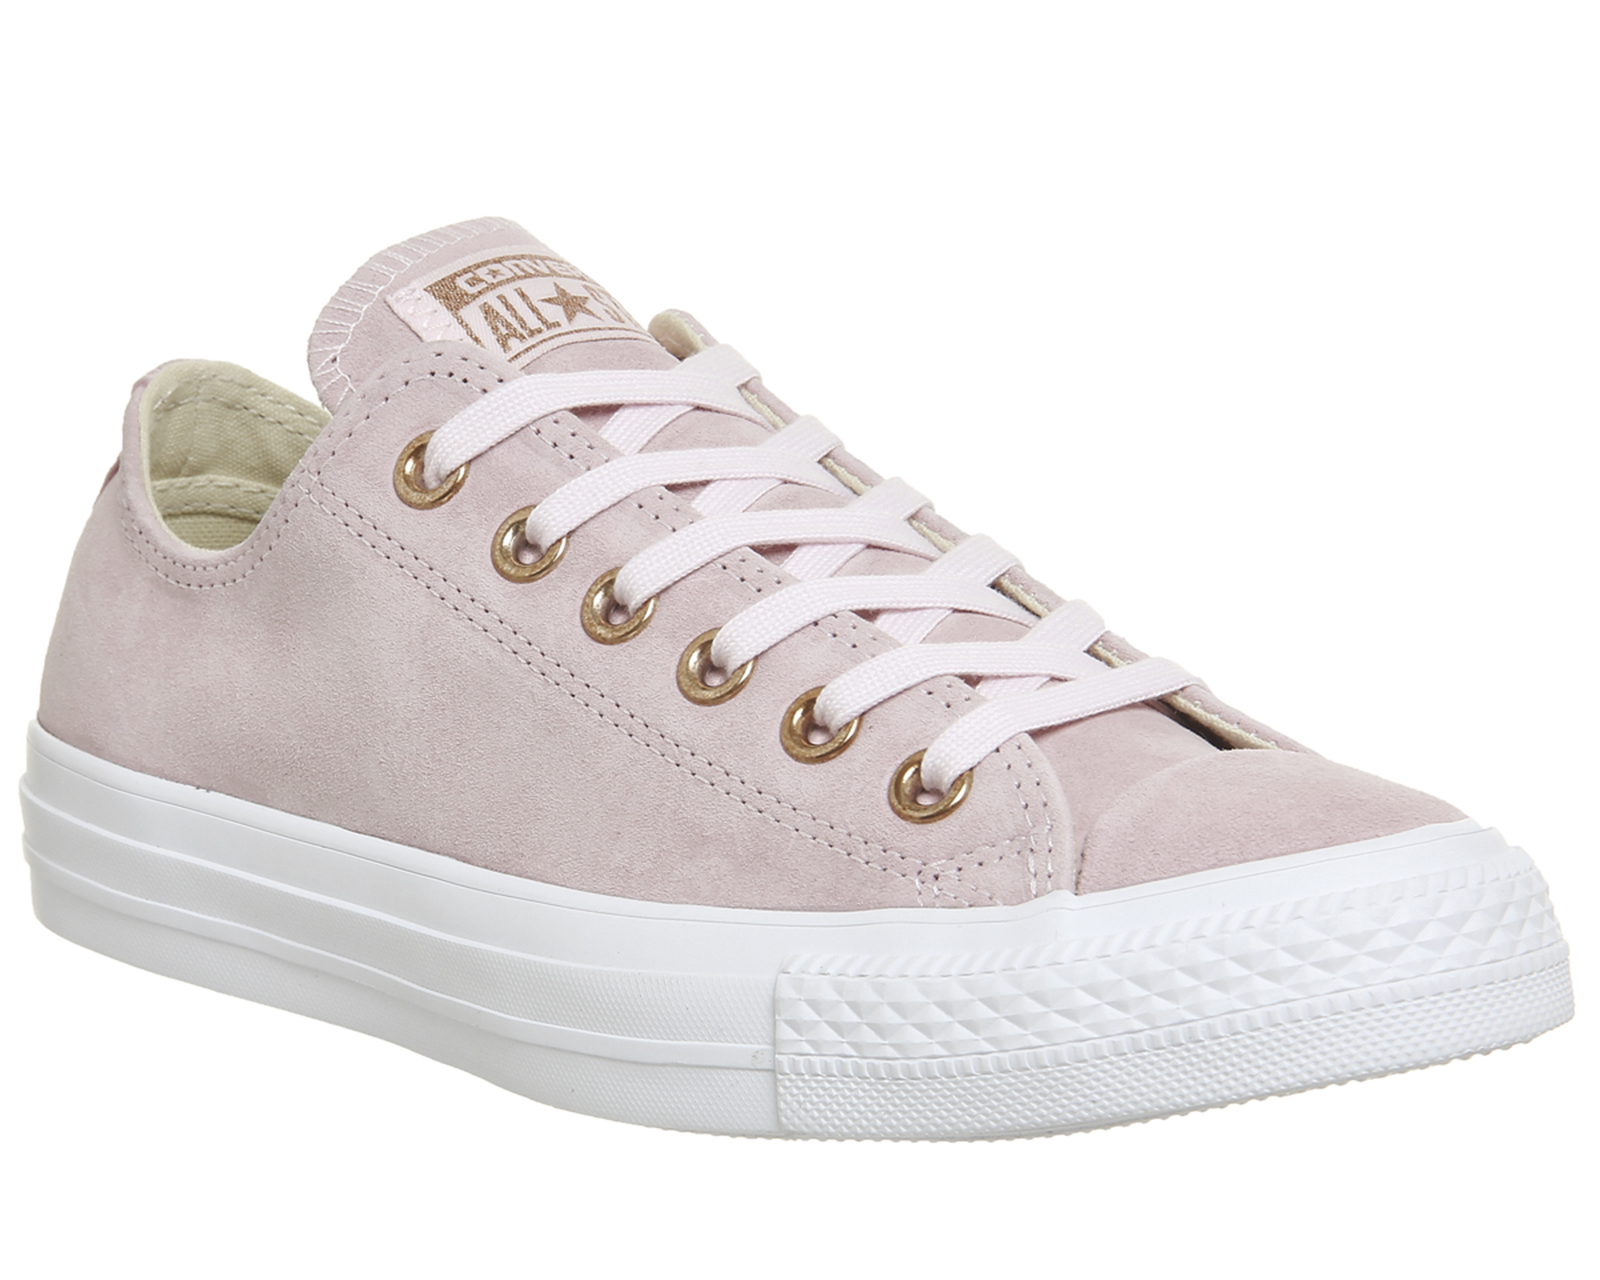 pink and rose gold converse